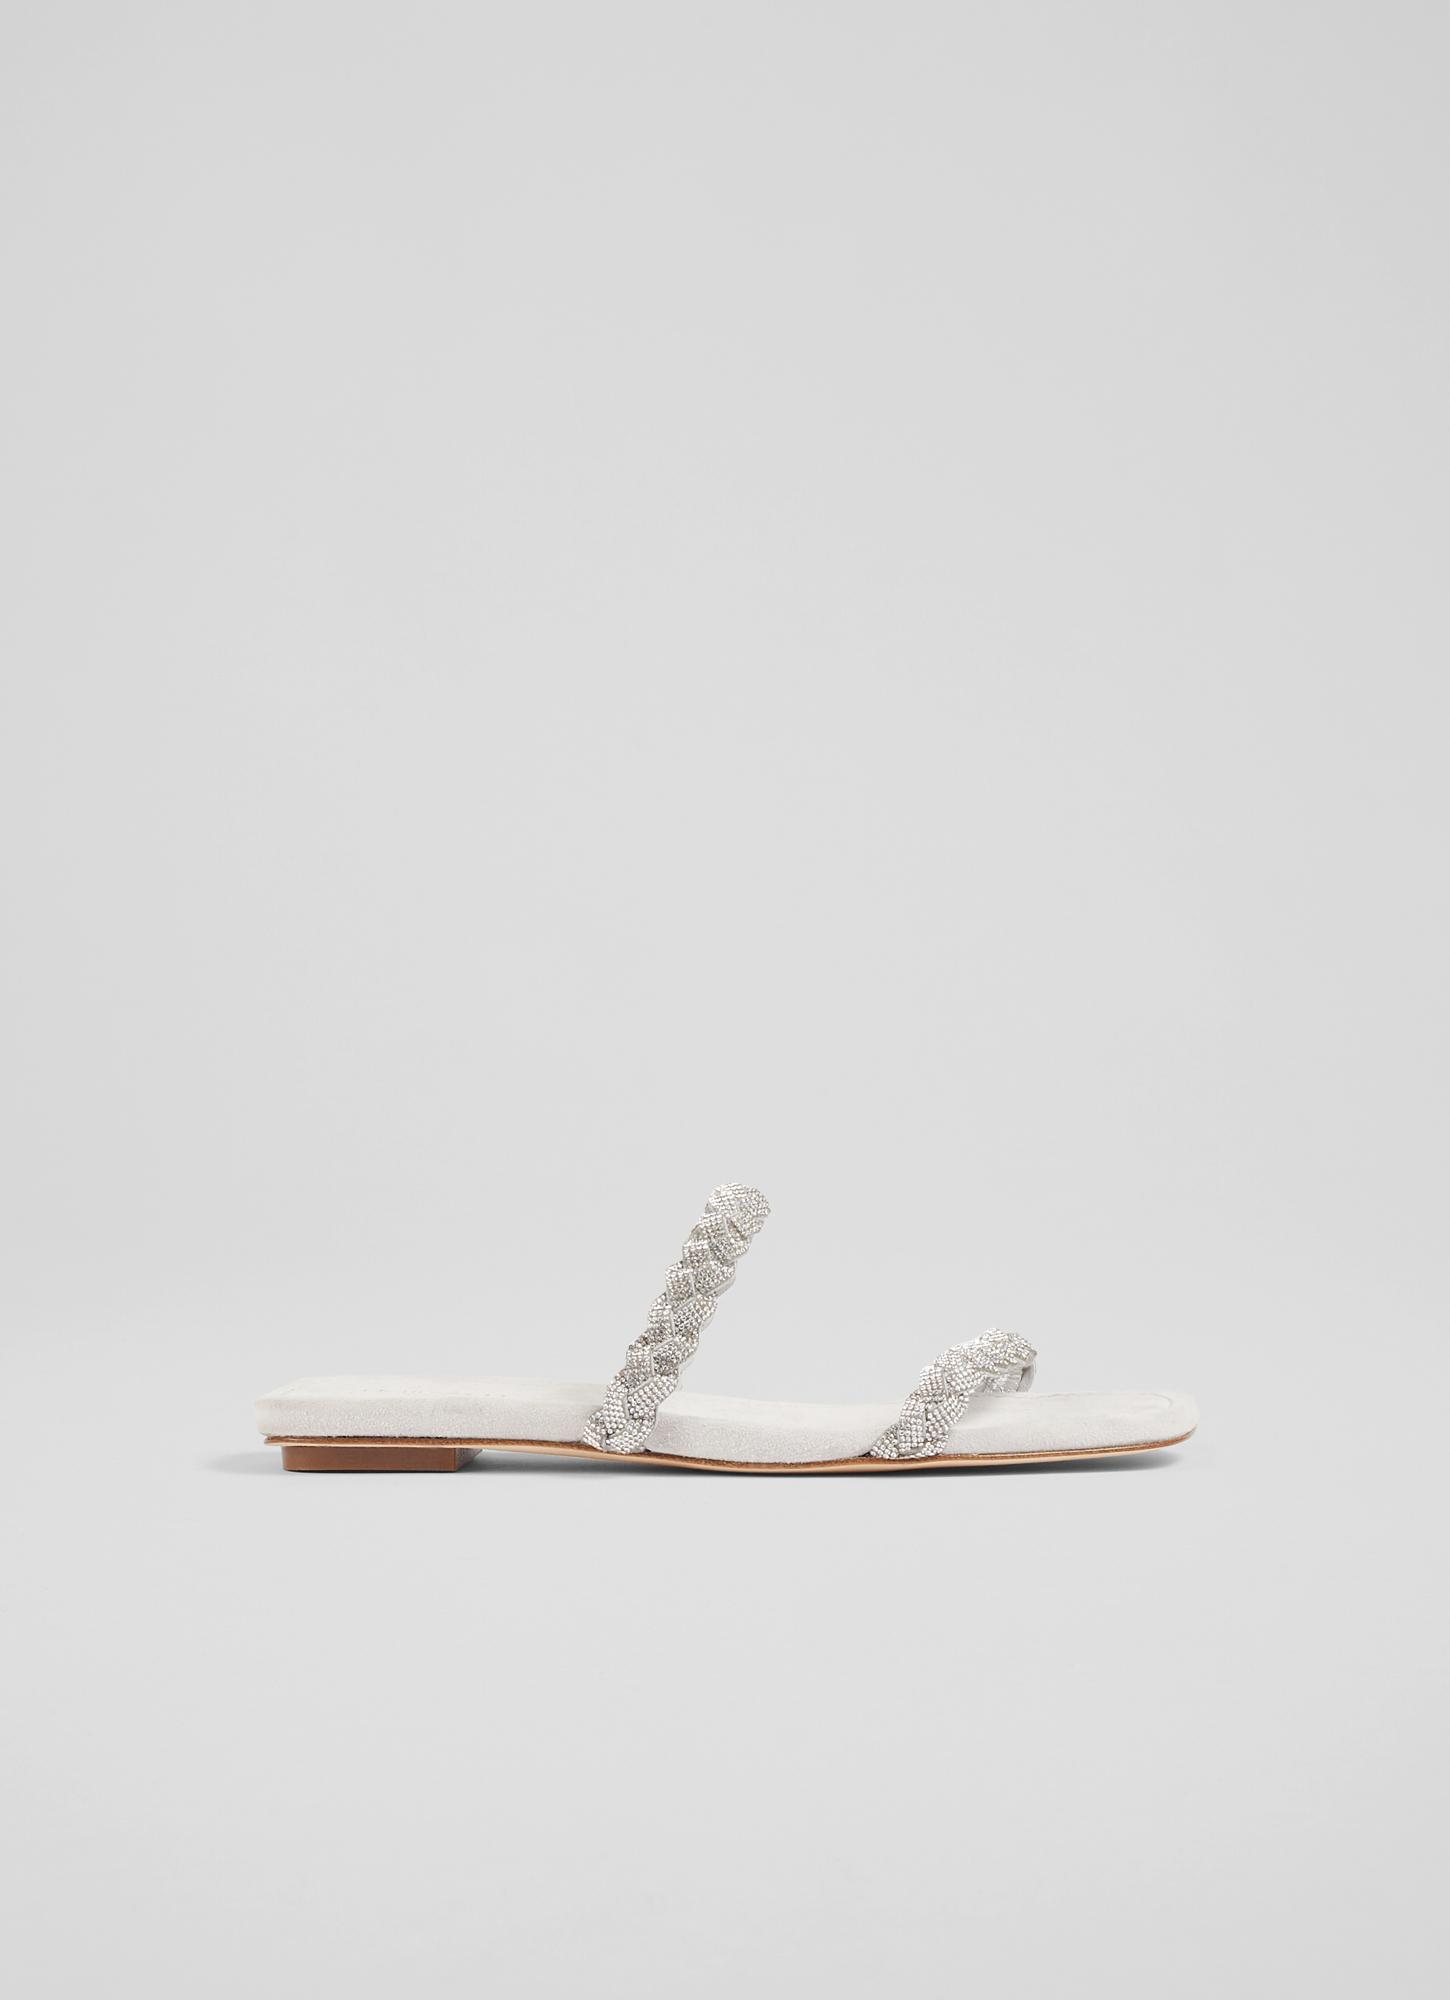 L.K.Bennett Ria Silver Suede and Crystal Plaited Flat Sandals, Silver